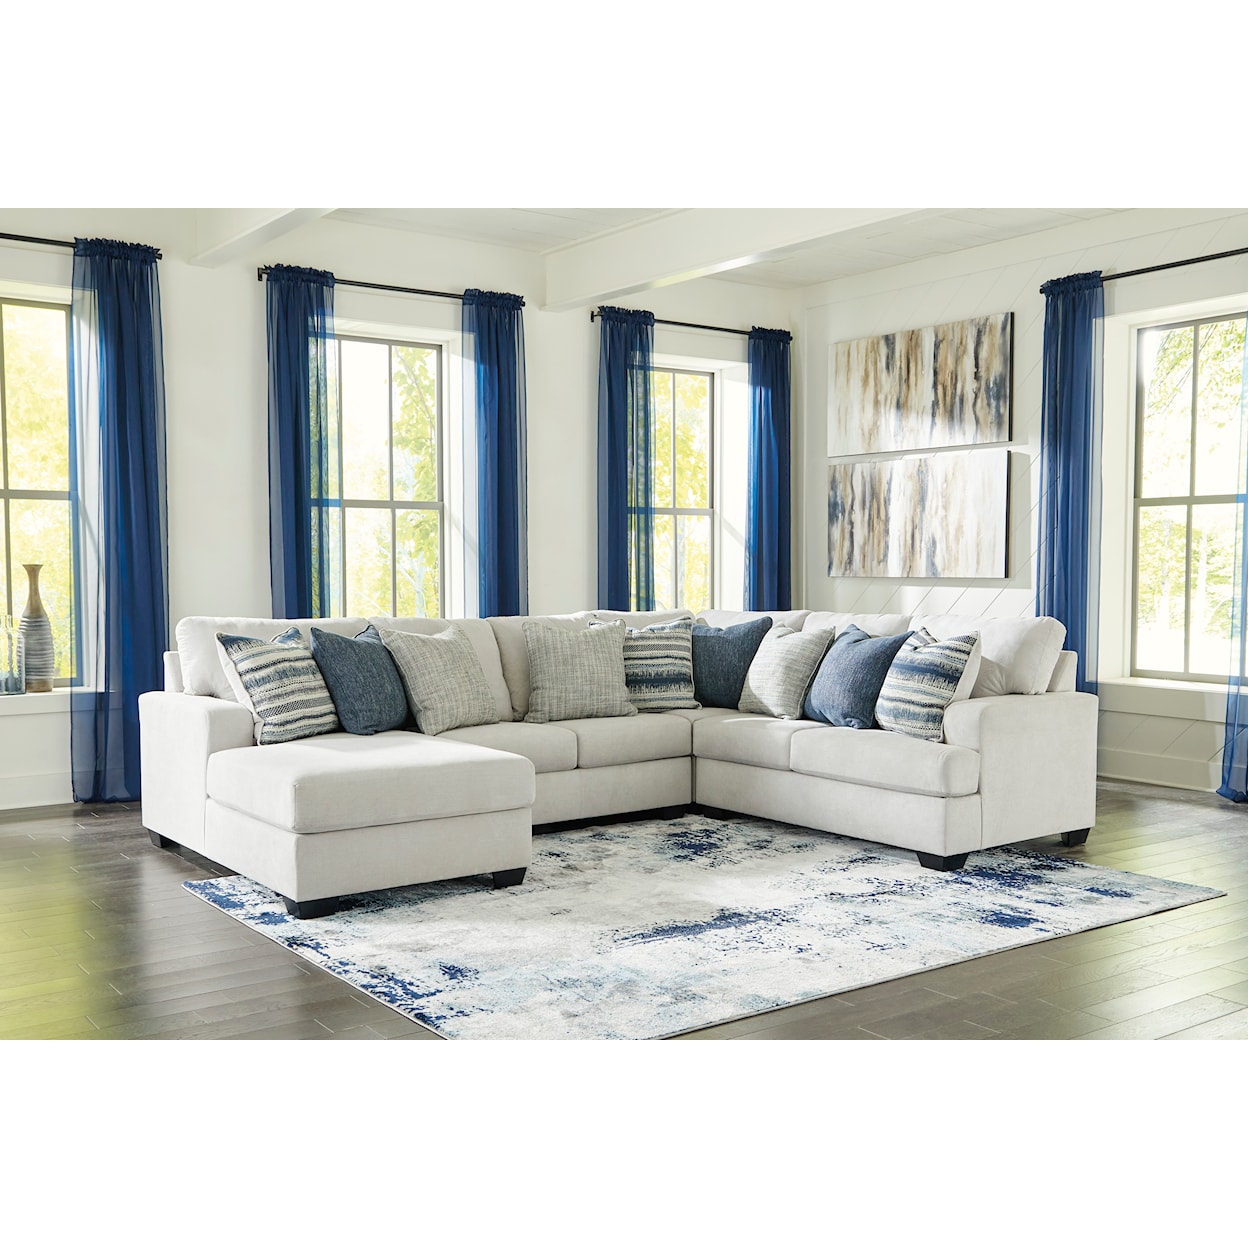 Ashley Furniture Benchcraft Lowder 4-Piece Sectional with Chaise